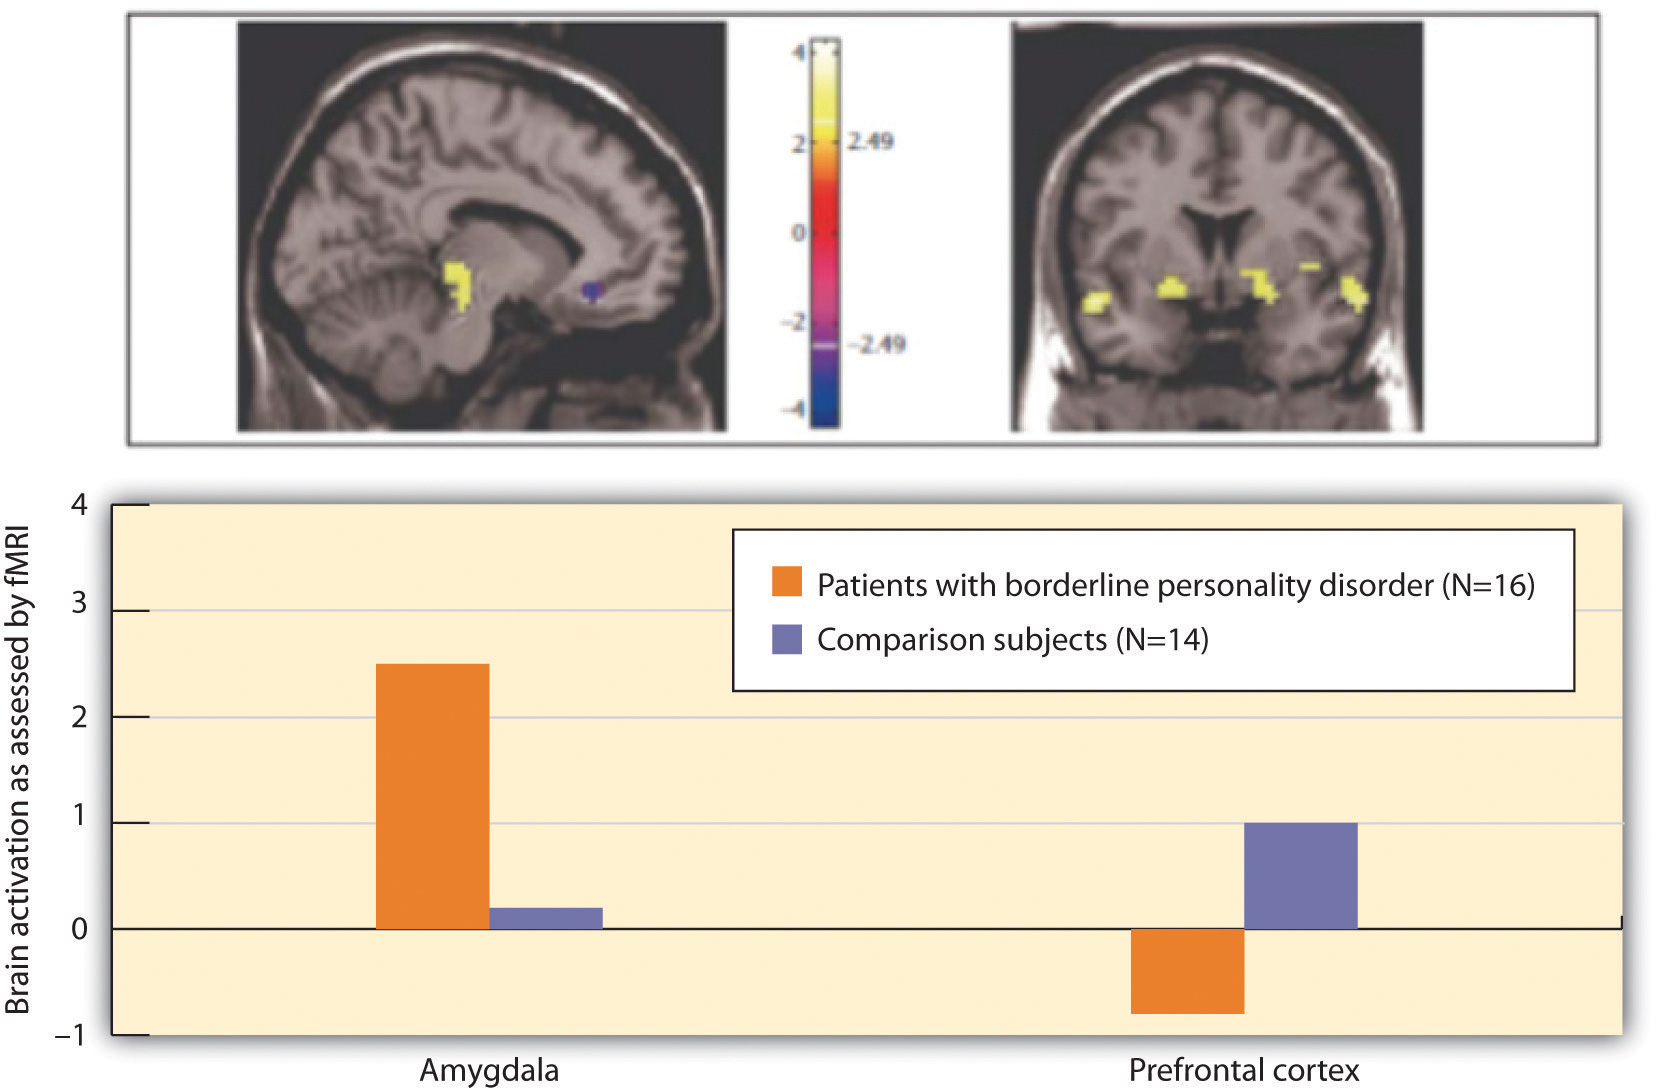 Above, these pictures show two brain scans comparing the level of brain activity in the emotional centres in the amygdala (left) and the prefrontal cortex (right); below, this chart contrasts brain activation as assessed by fMRI by amygdala and prefrontal cortex in patients with borderline personality disorder and comparison subjects.